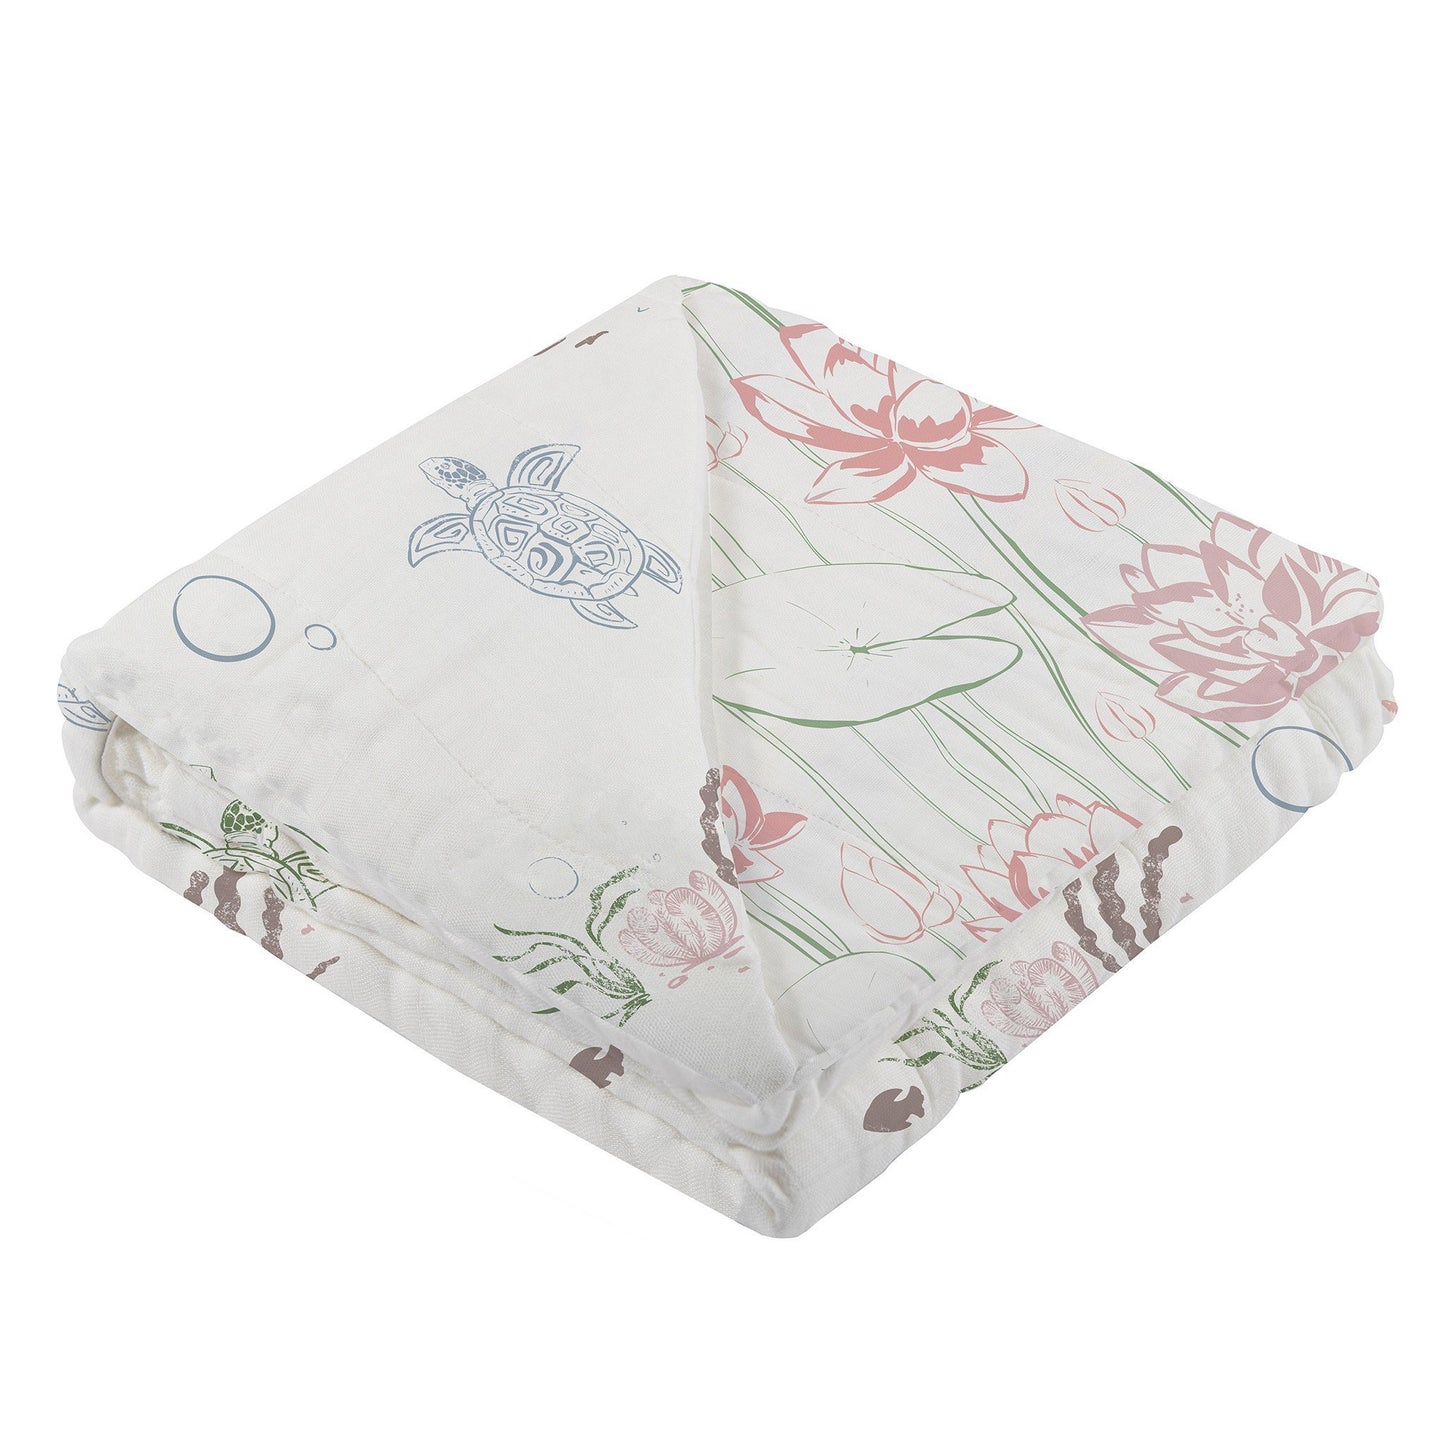 Turtles and Water Lily Bamboo Muslin Newcastle Blanket